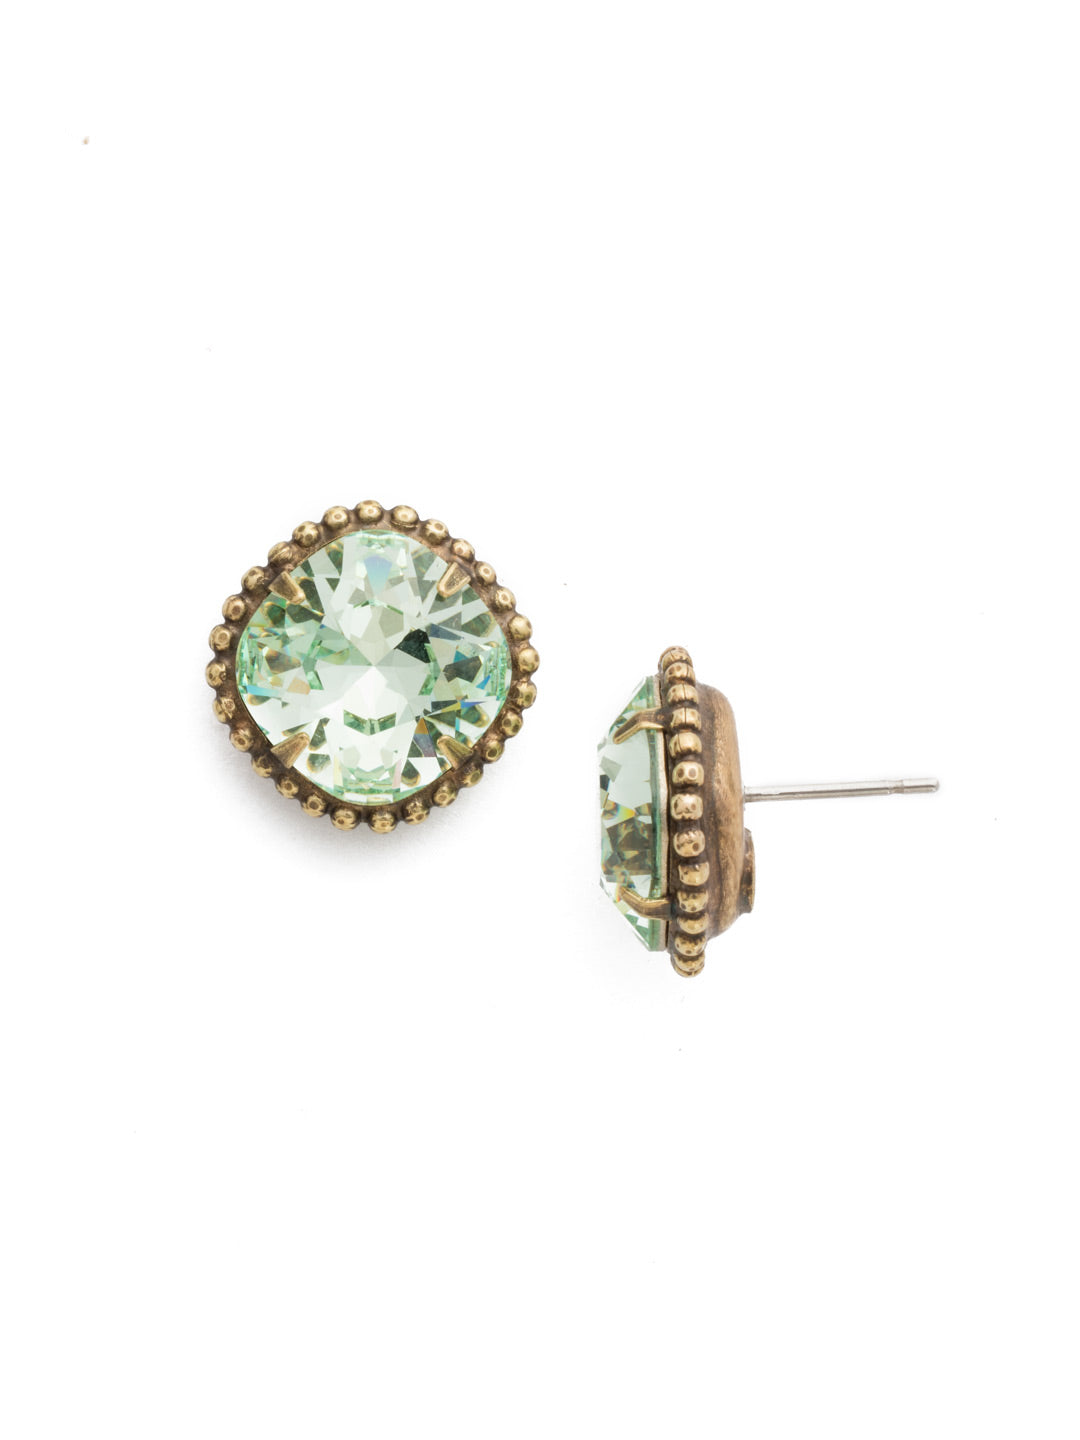 Cushion-Cut Solitaire Stud Earrings - EBX10AGMIN - All around allure; the Cushion-Cut Solitaire Stud Earring features a rounded-edge, cushion cut stone that is encircled by a vintage inspired decorative, edged border. A post backing ensures comfortable, everyday wear. From Sorrelli's Mint collection in our Antique Gold-tone finish.